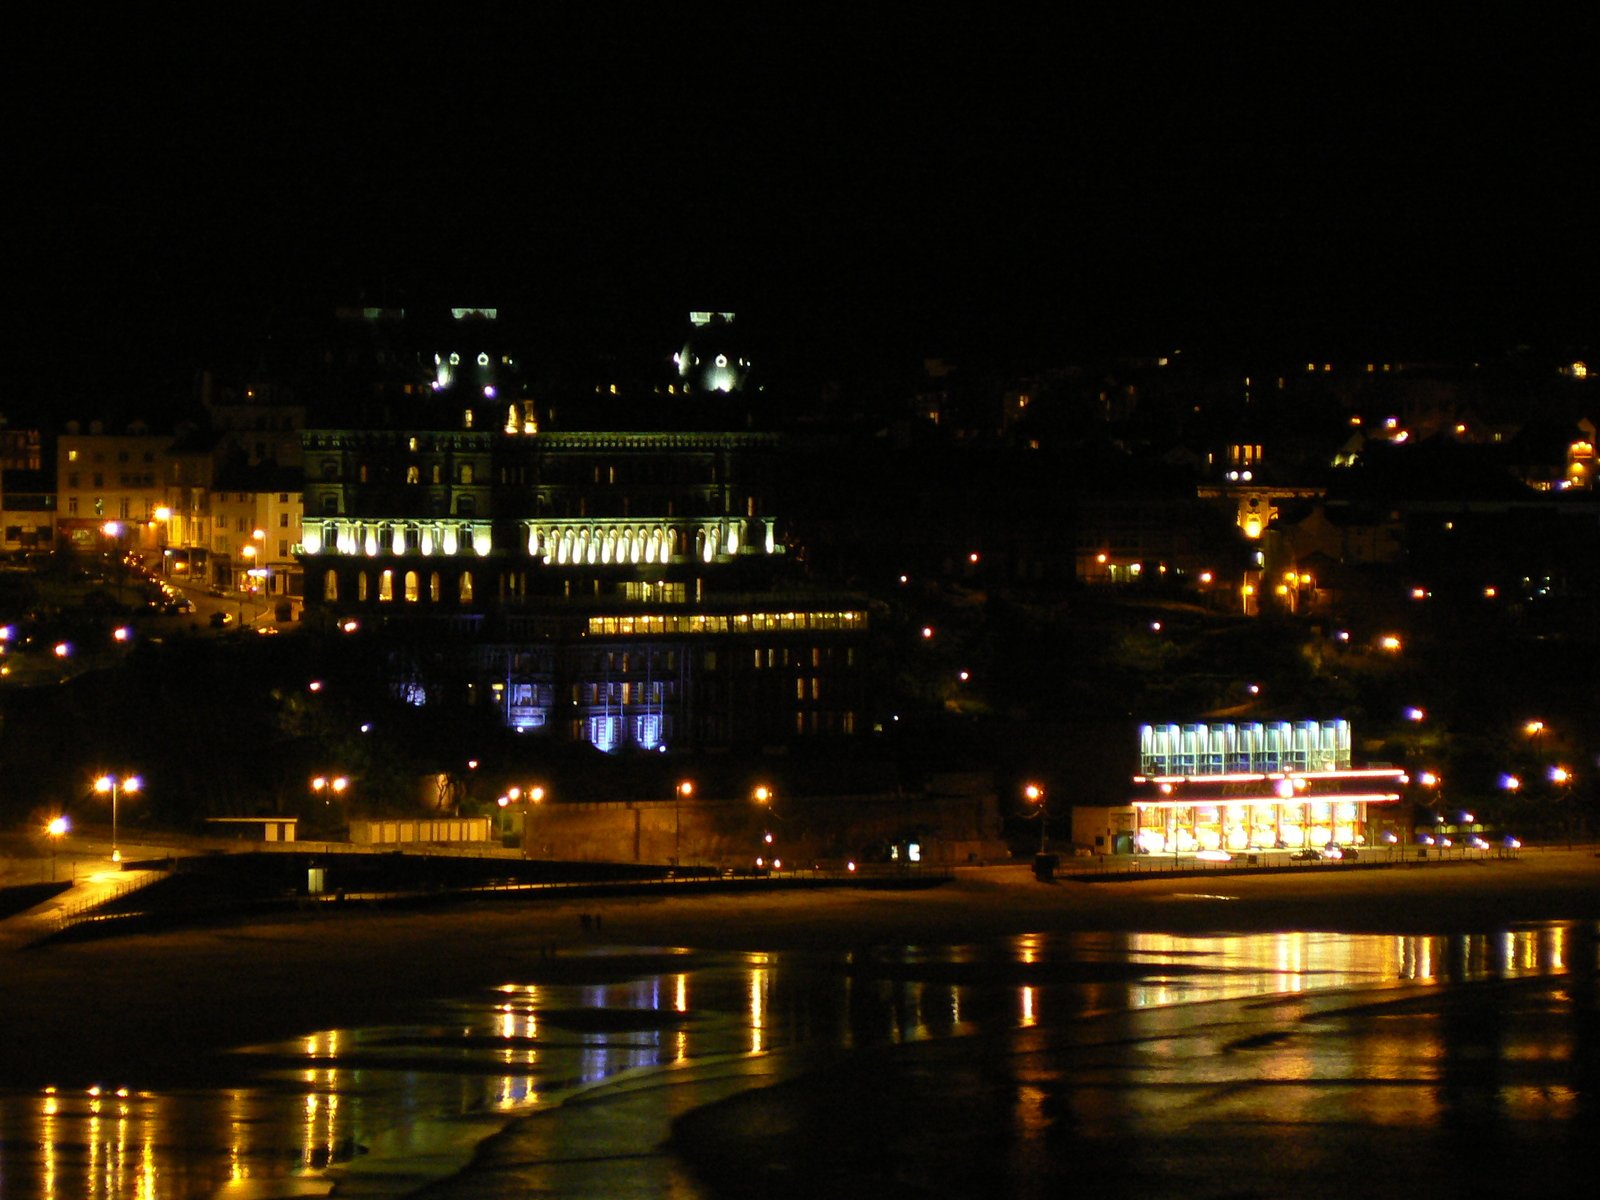 the buildings are lit up at night beside the water